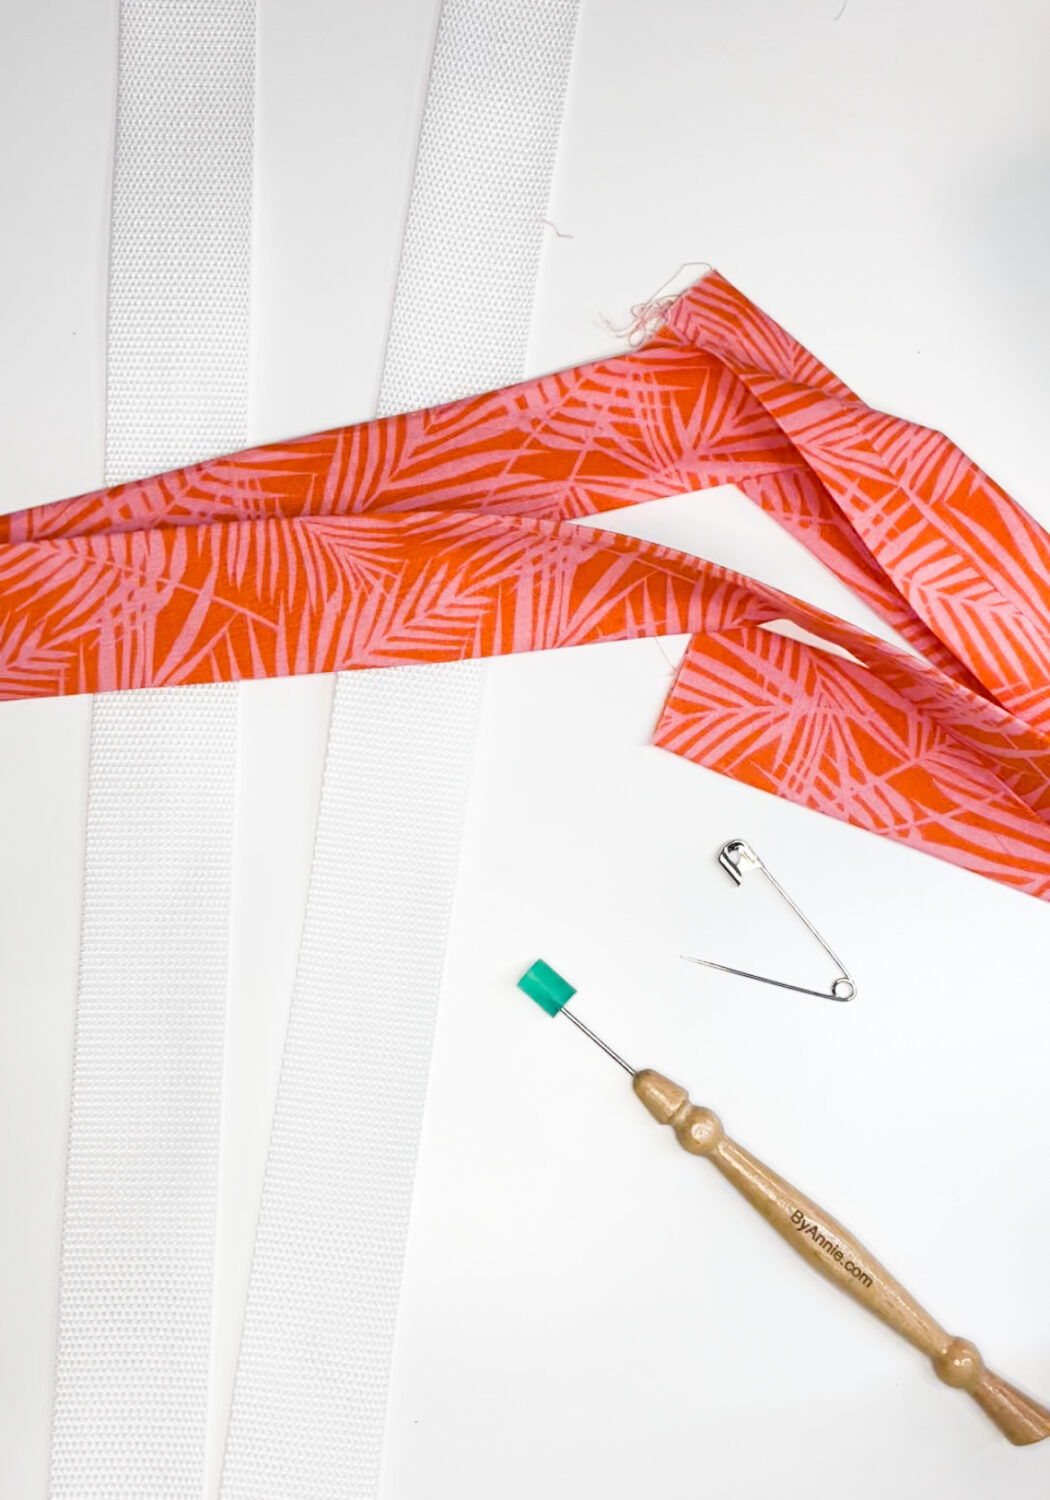 Week 2 of the All The Things Tote Sew-along – Knot and Thread Design